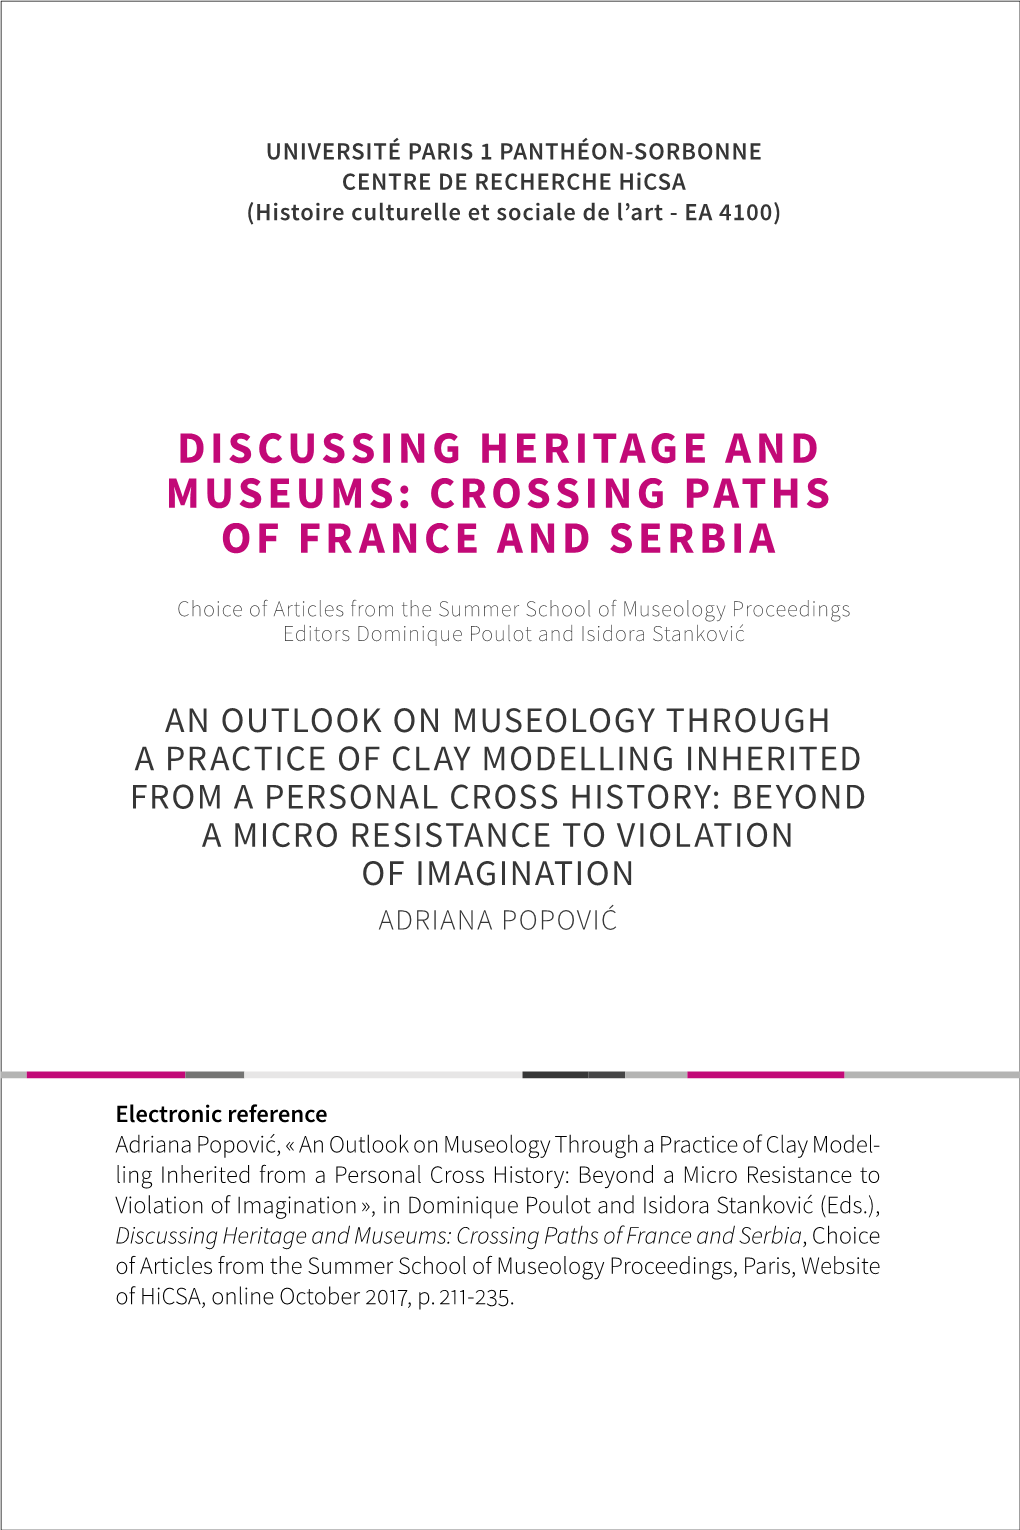 An Outlook on Museology Through a Practice of Clay Modelling